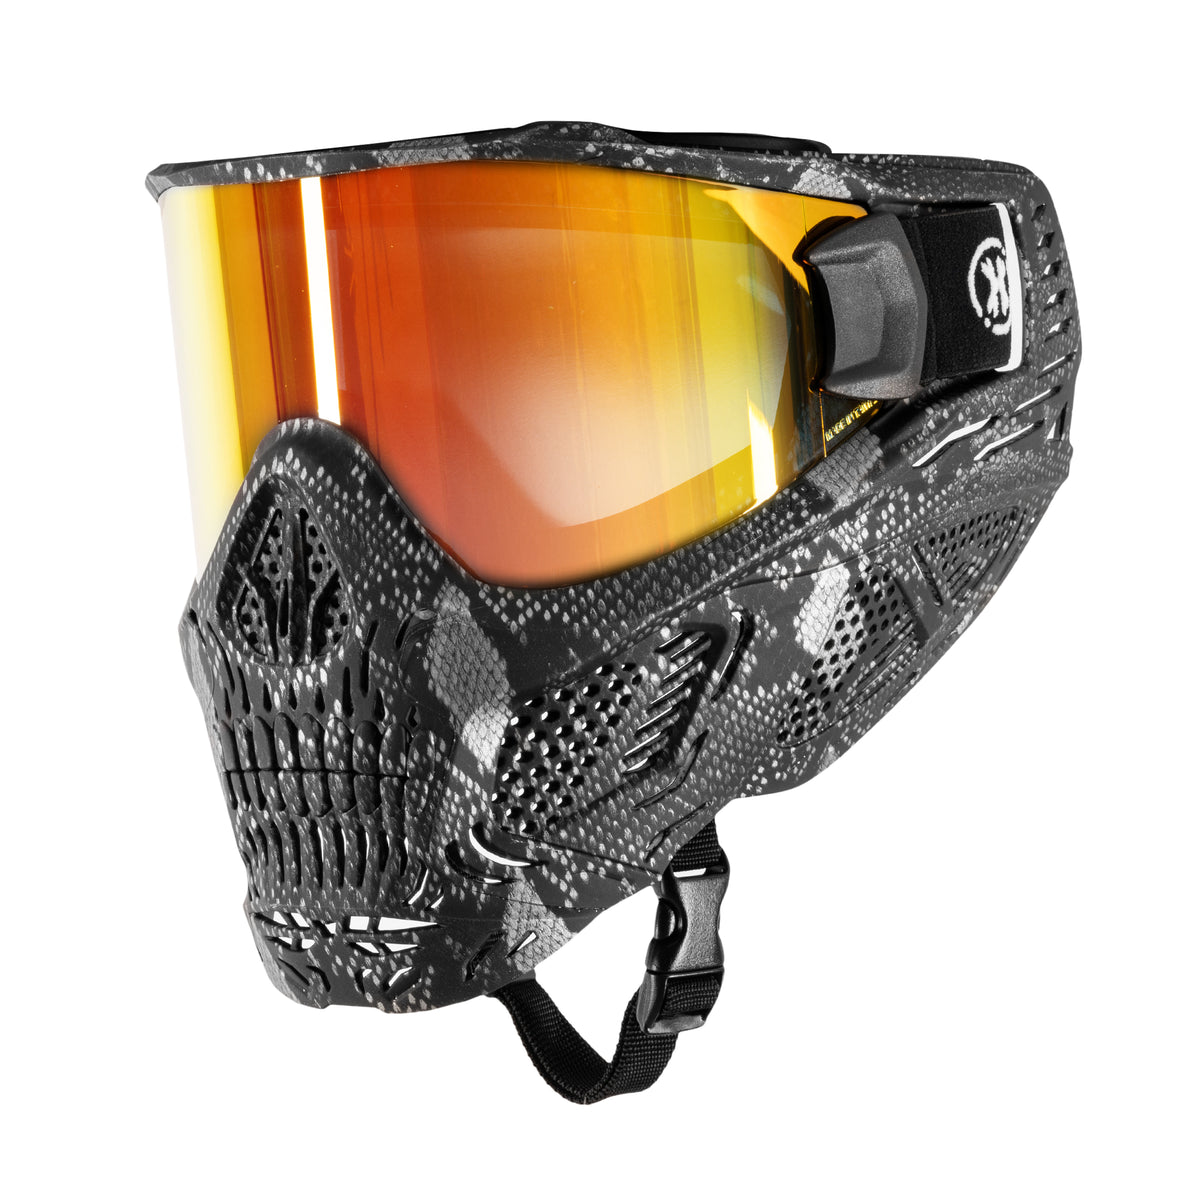 HSTL Skull Goggle "Snake Grey" W/ Fire Lens | Paintball Goggle | Mask | Hk Army